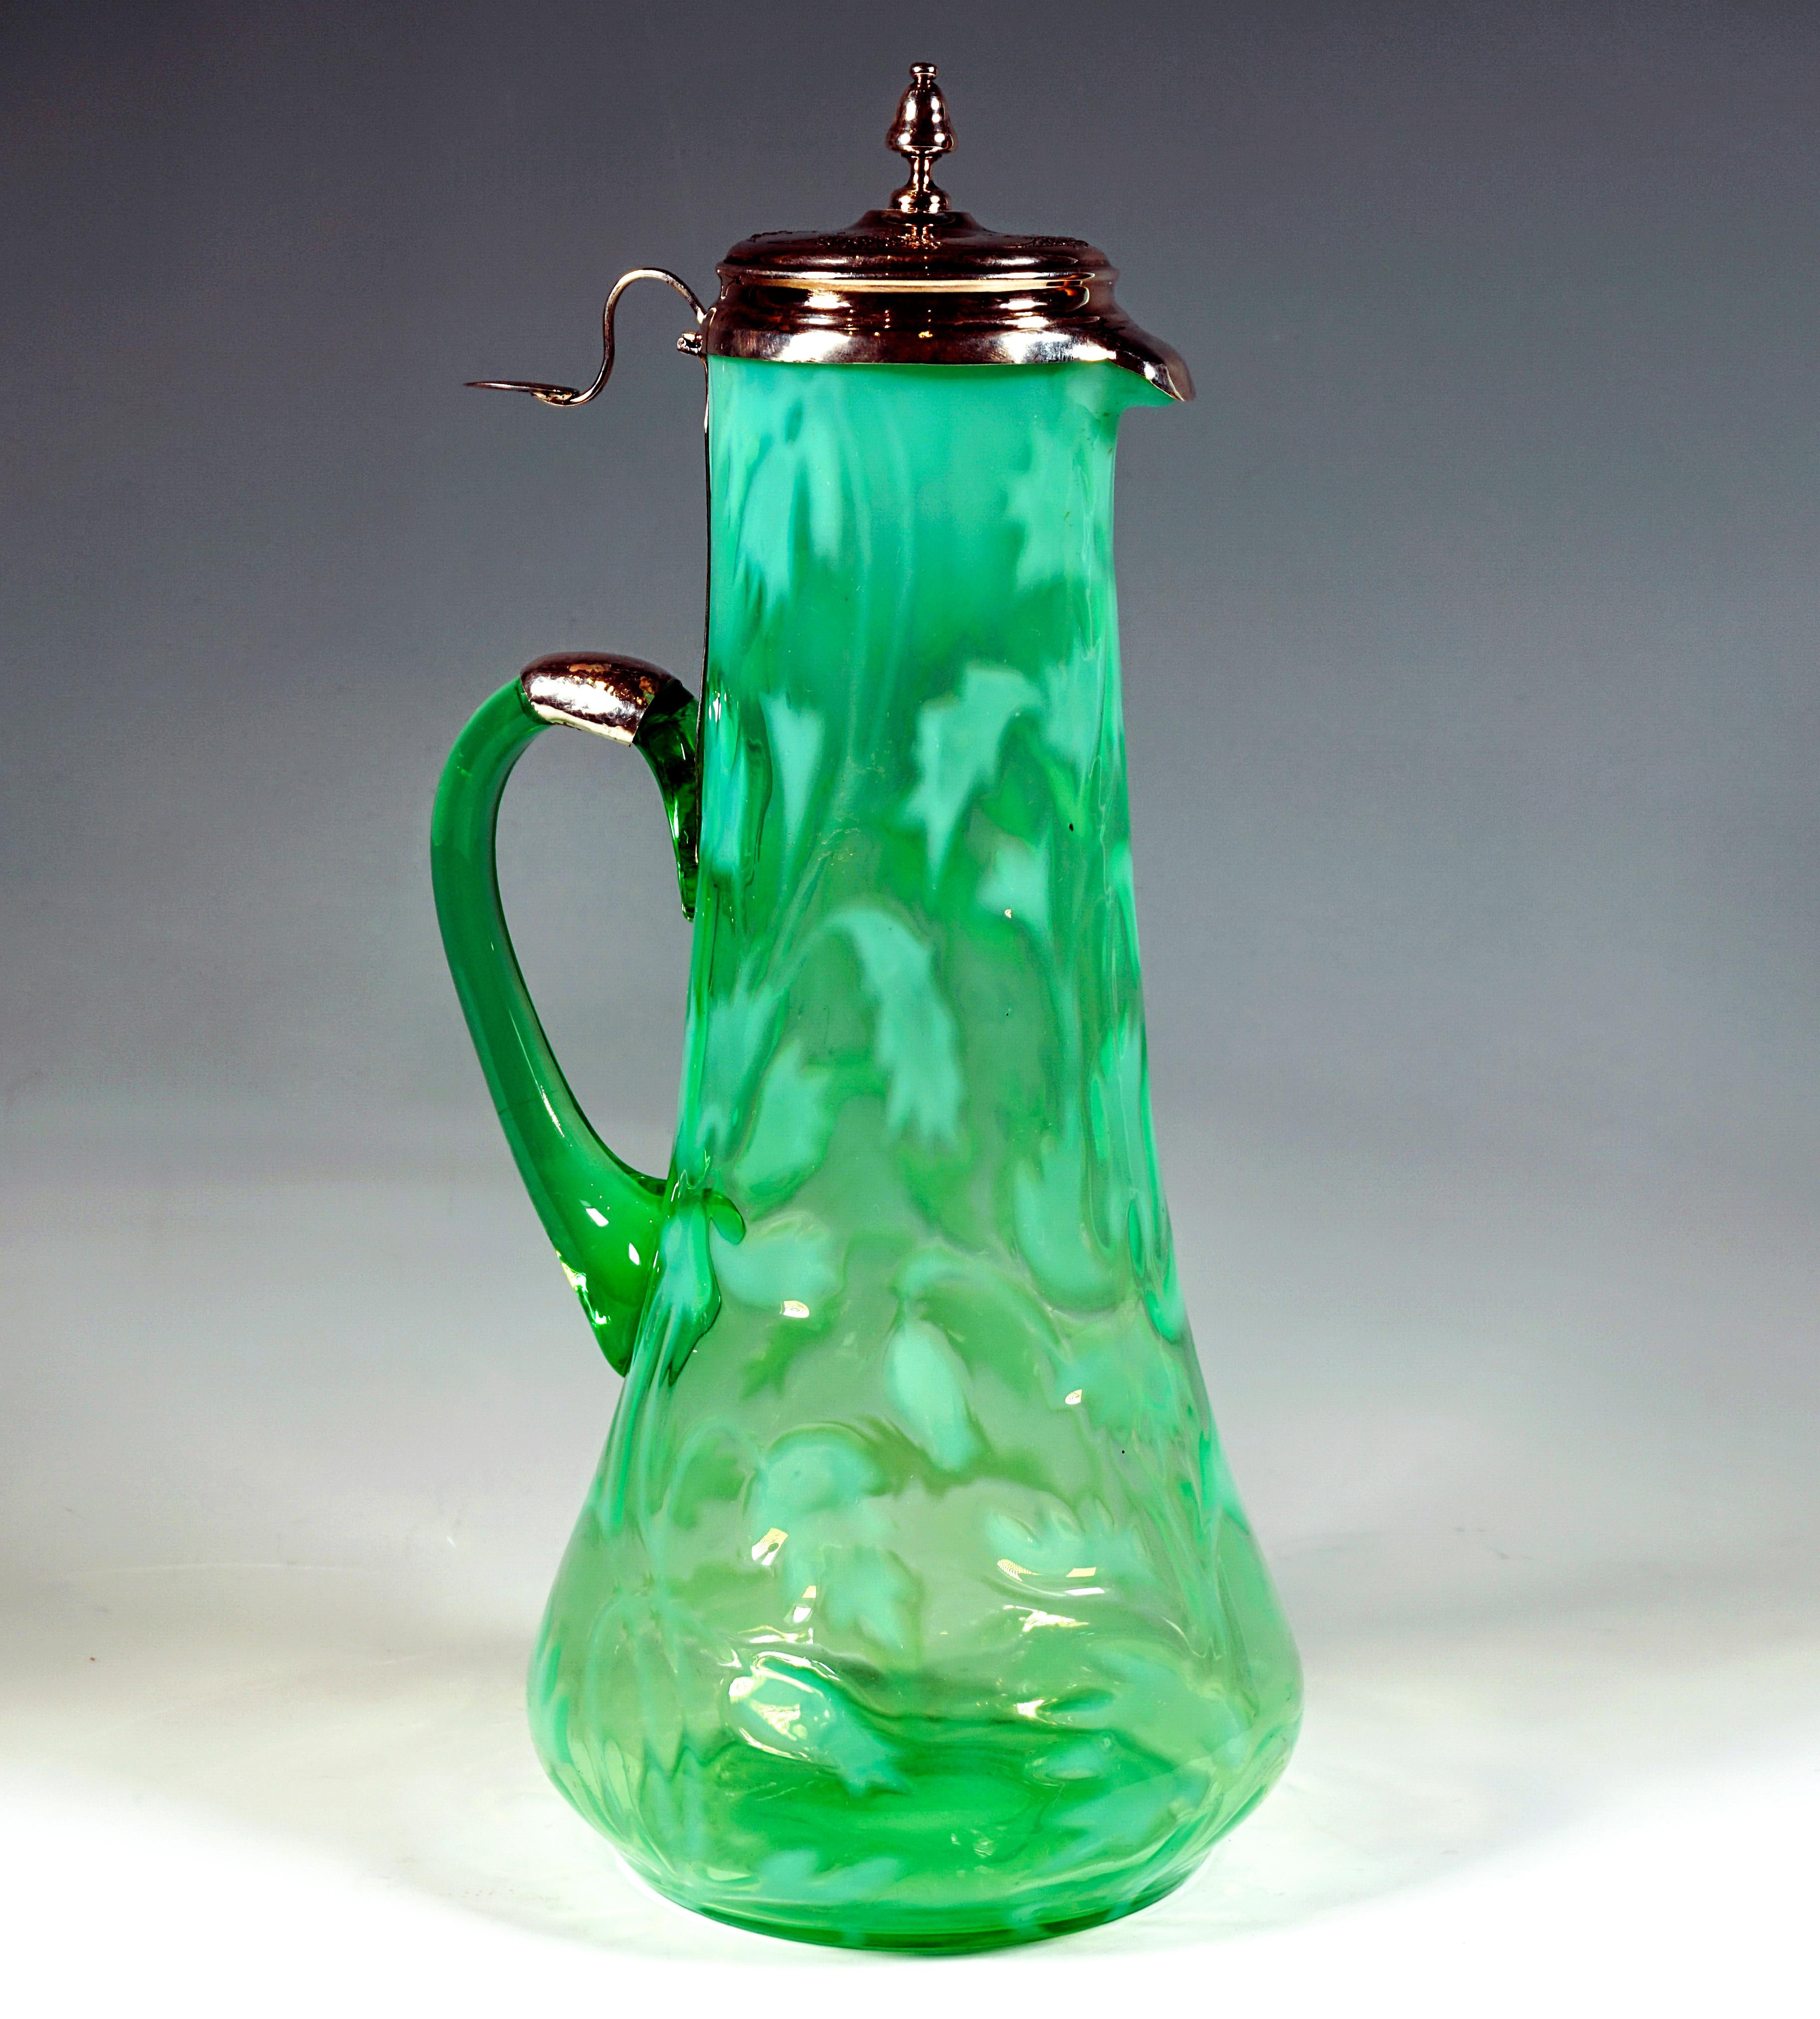 Carafe made of green glass with cryolite inclusions (opaline) in the shape of feathered leaves, with a conical body that swings out slightly at the bottom on a round, flush stand, beak spout, opposite attached glass handle, silver fittings above the